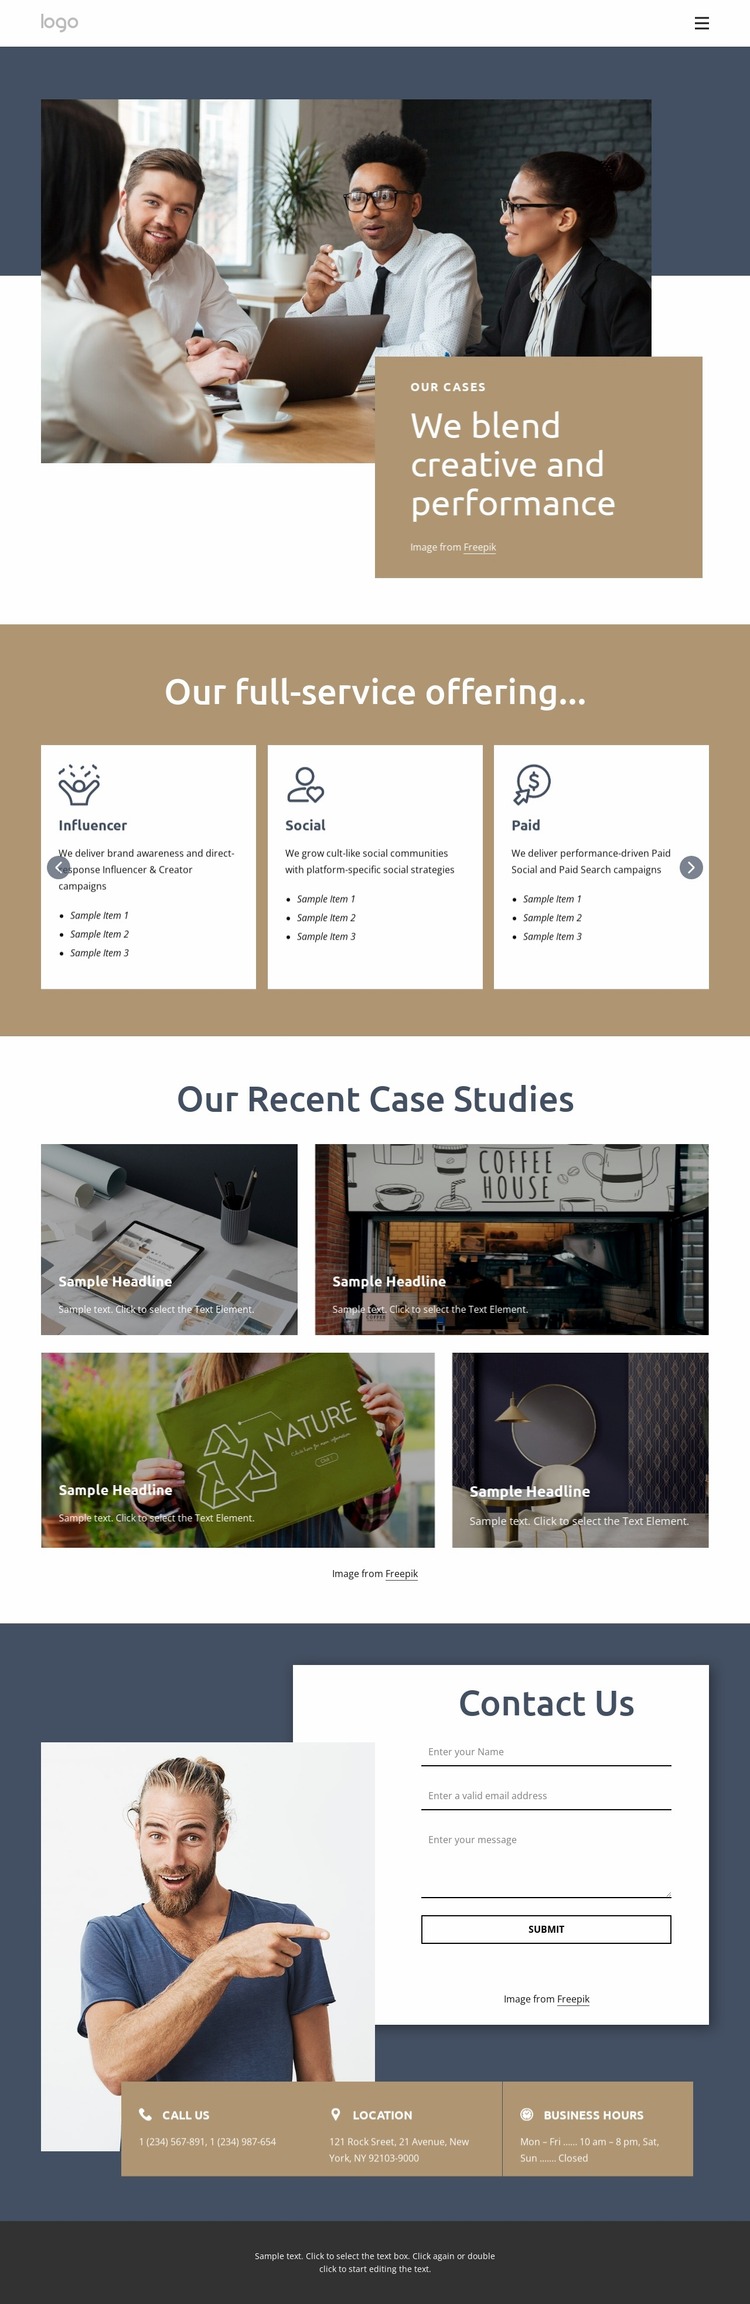 Solve real management consulting cases Website Mockup